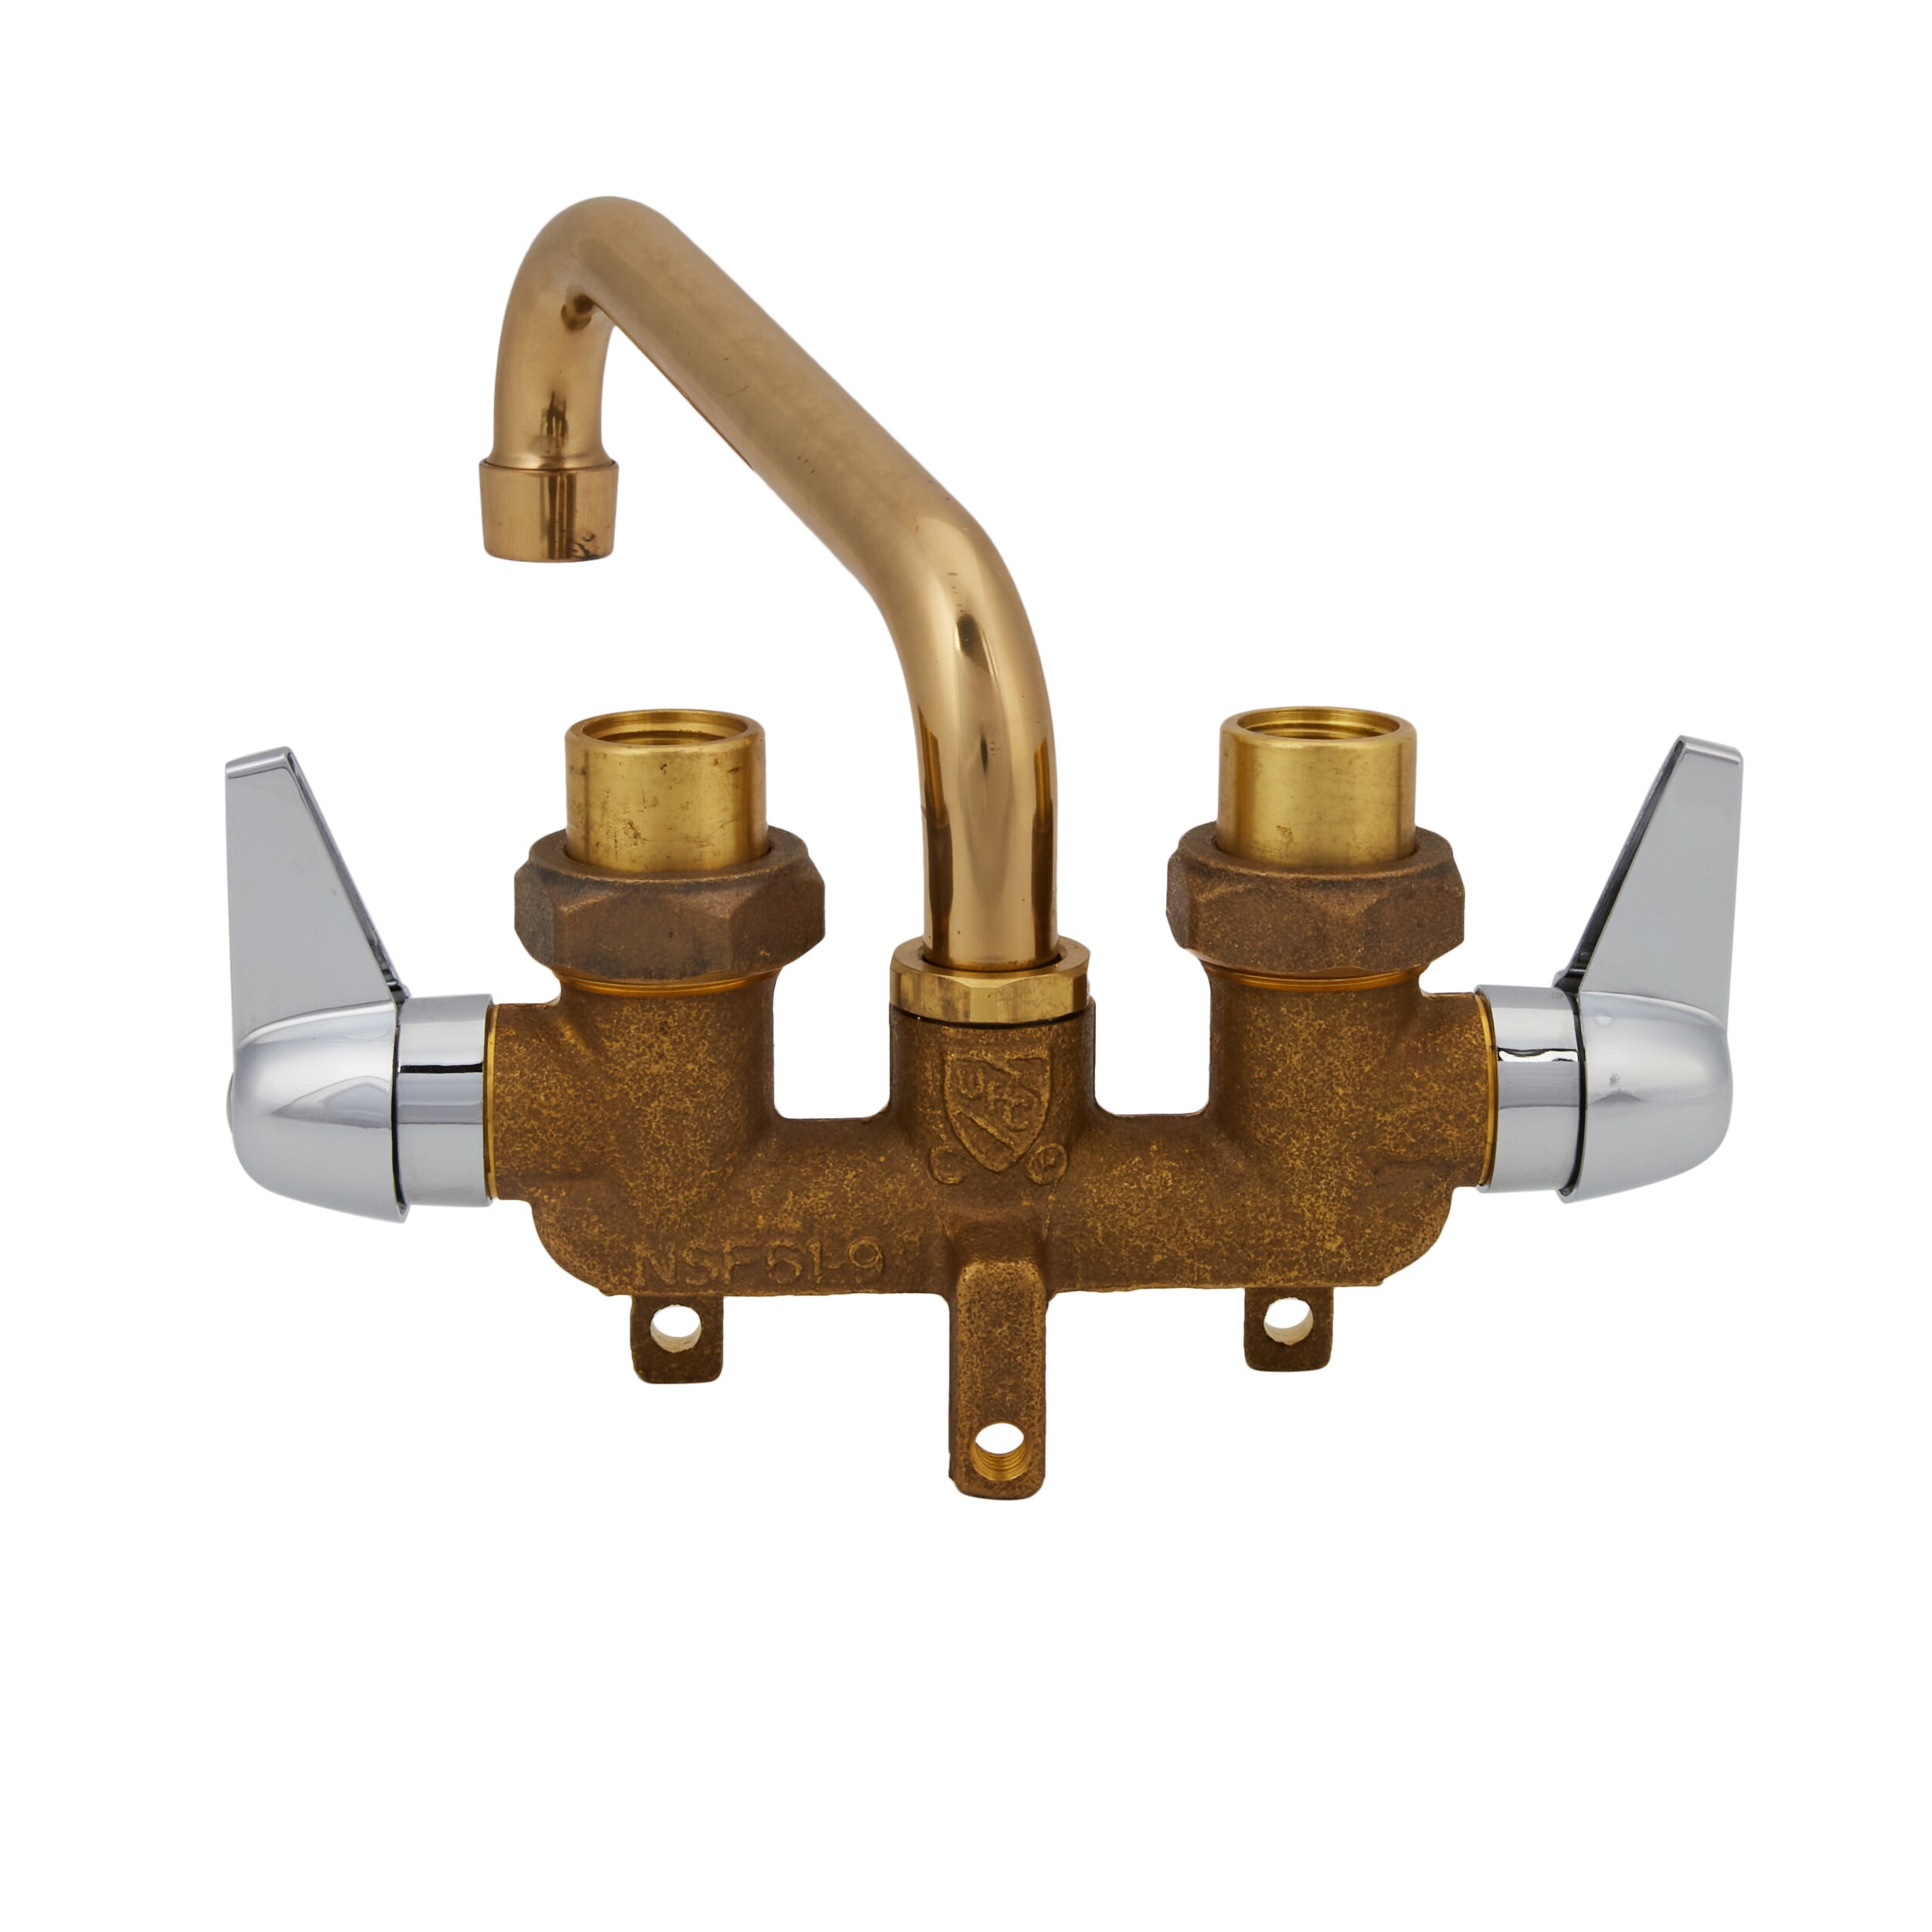 Homewerks Rough Brass Laundry Tray Faucet for sale online 